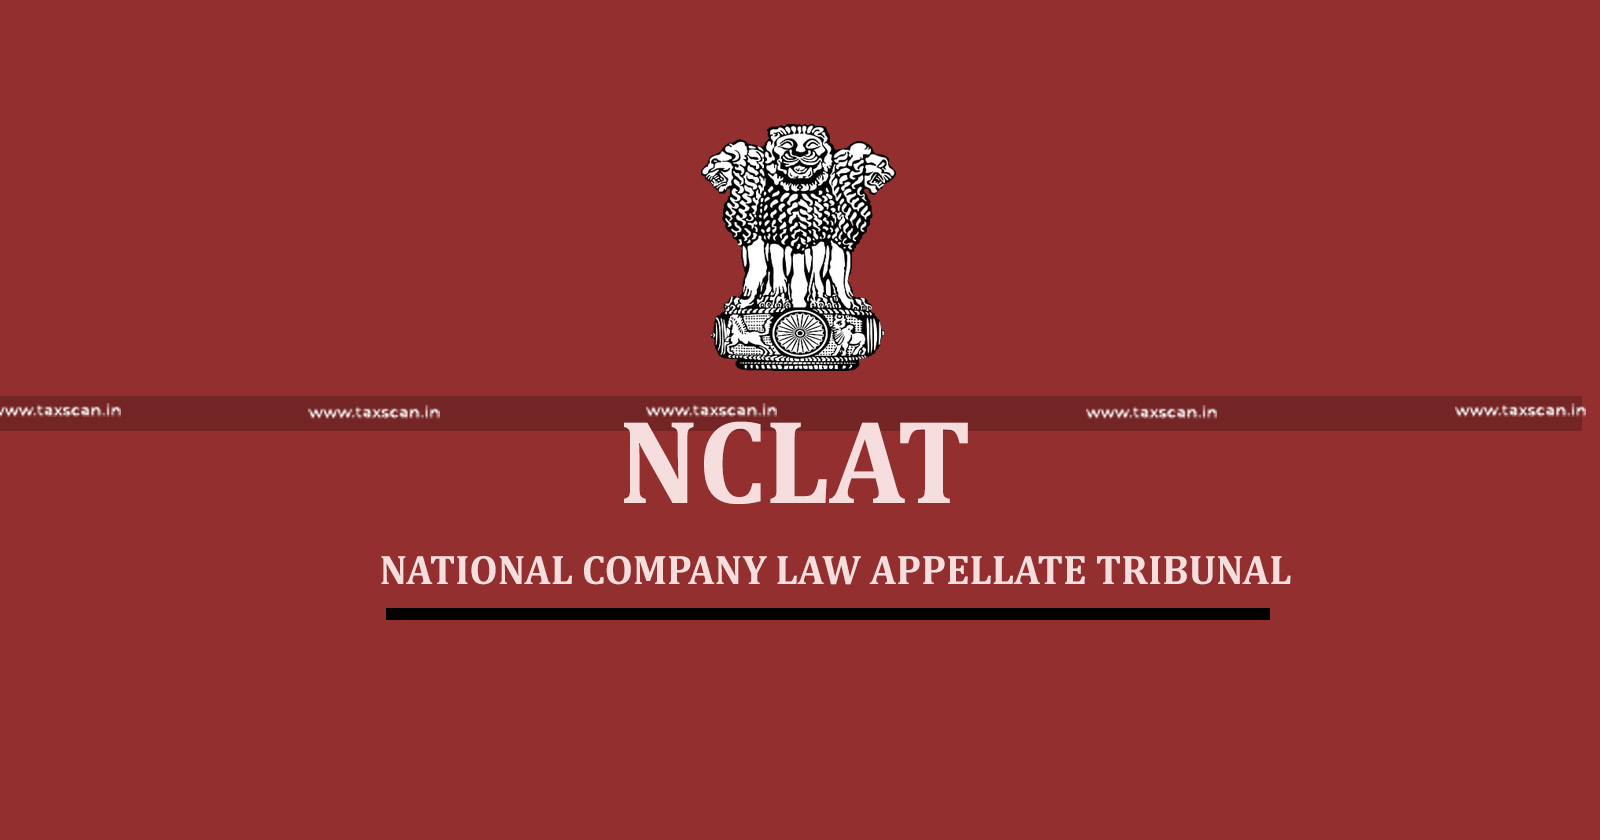 NCLAT on Resolution Replacement - Committee of Creditors - National Company Law Appellate Tribunal - COC - NCLAT - TAXSCAN